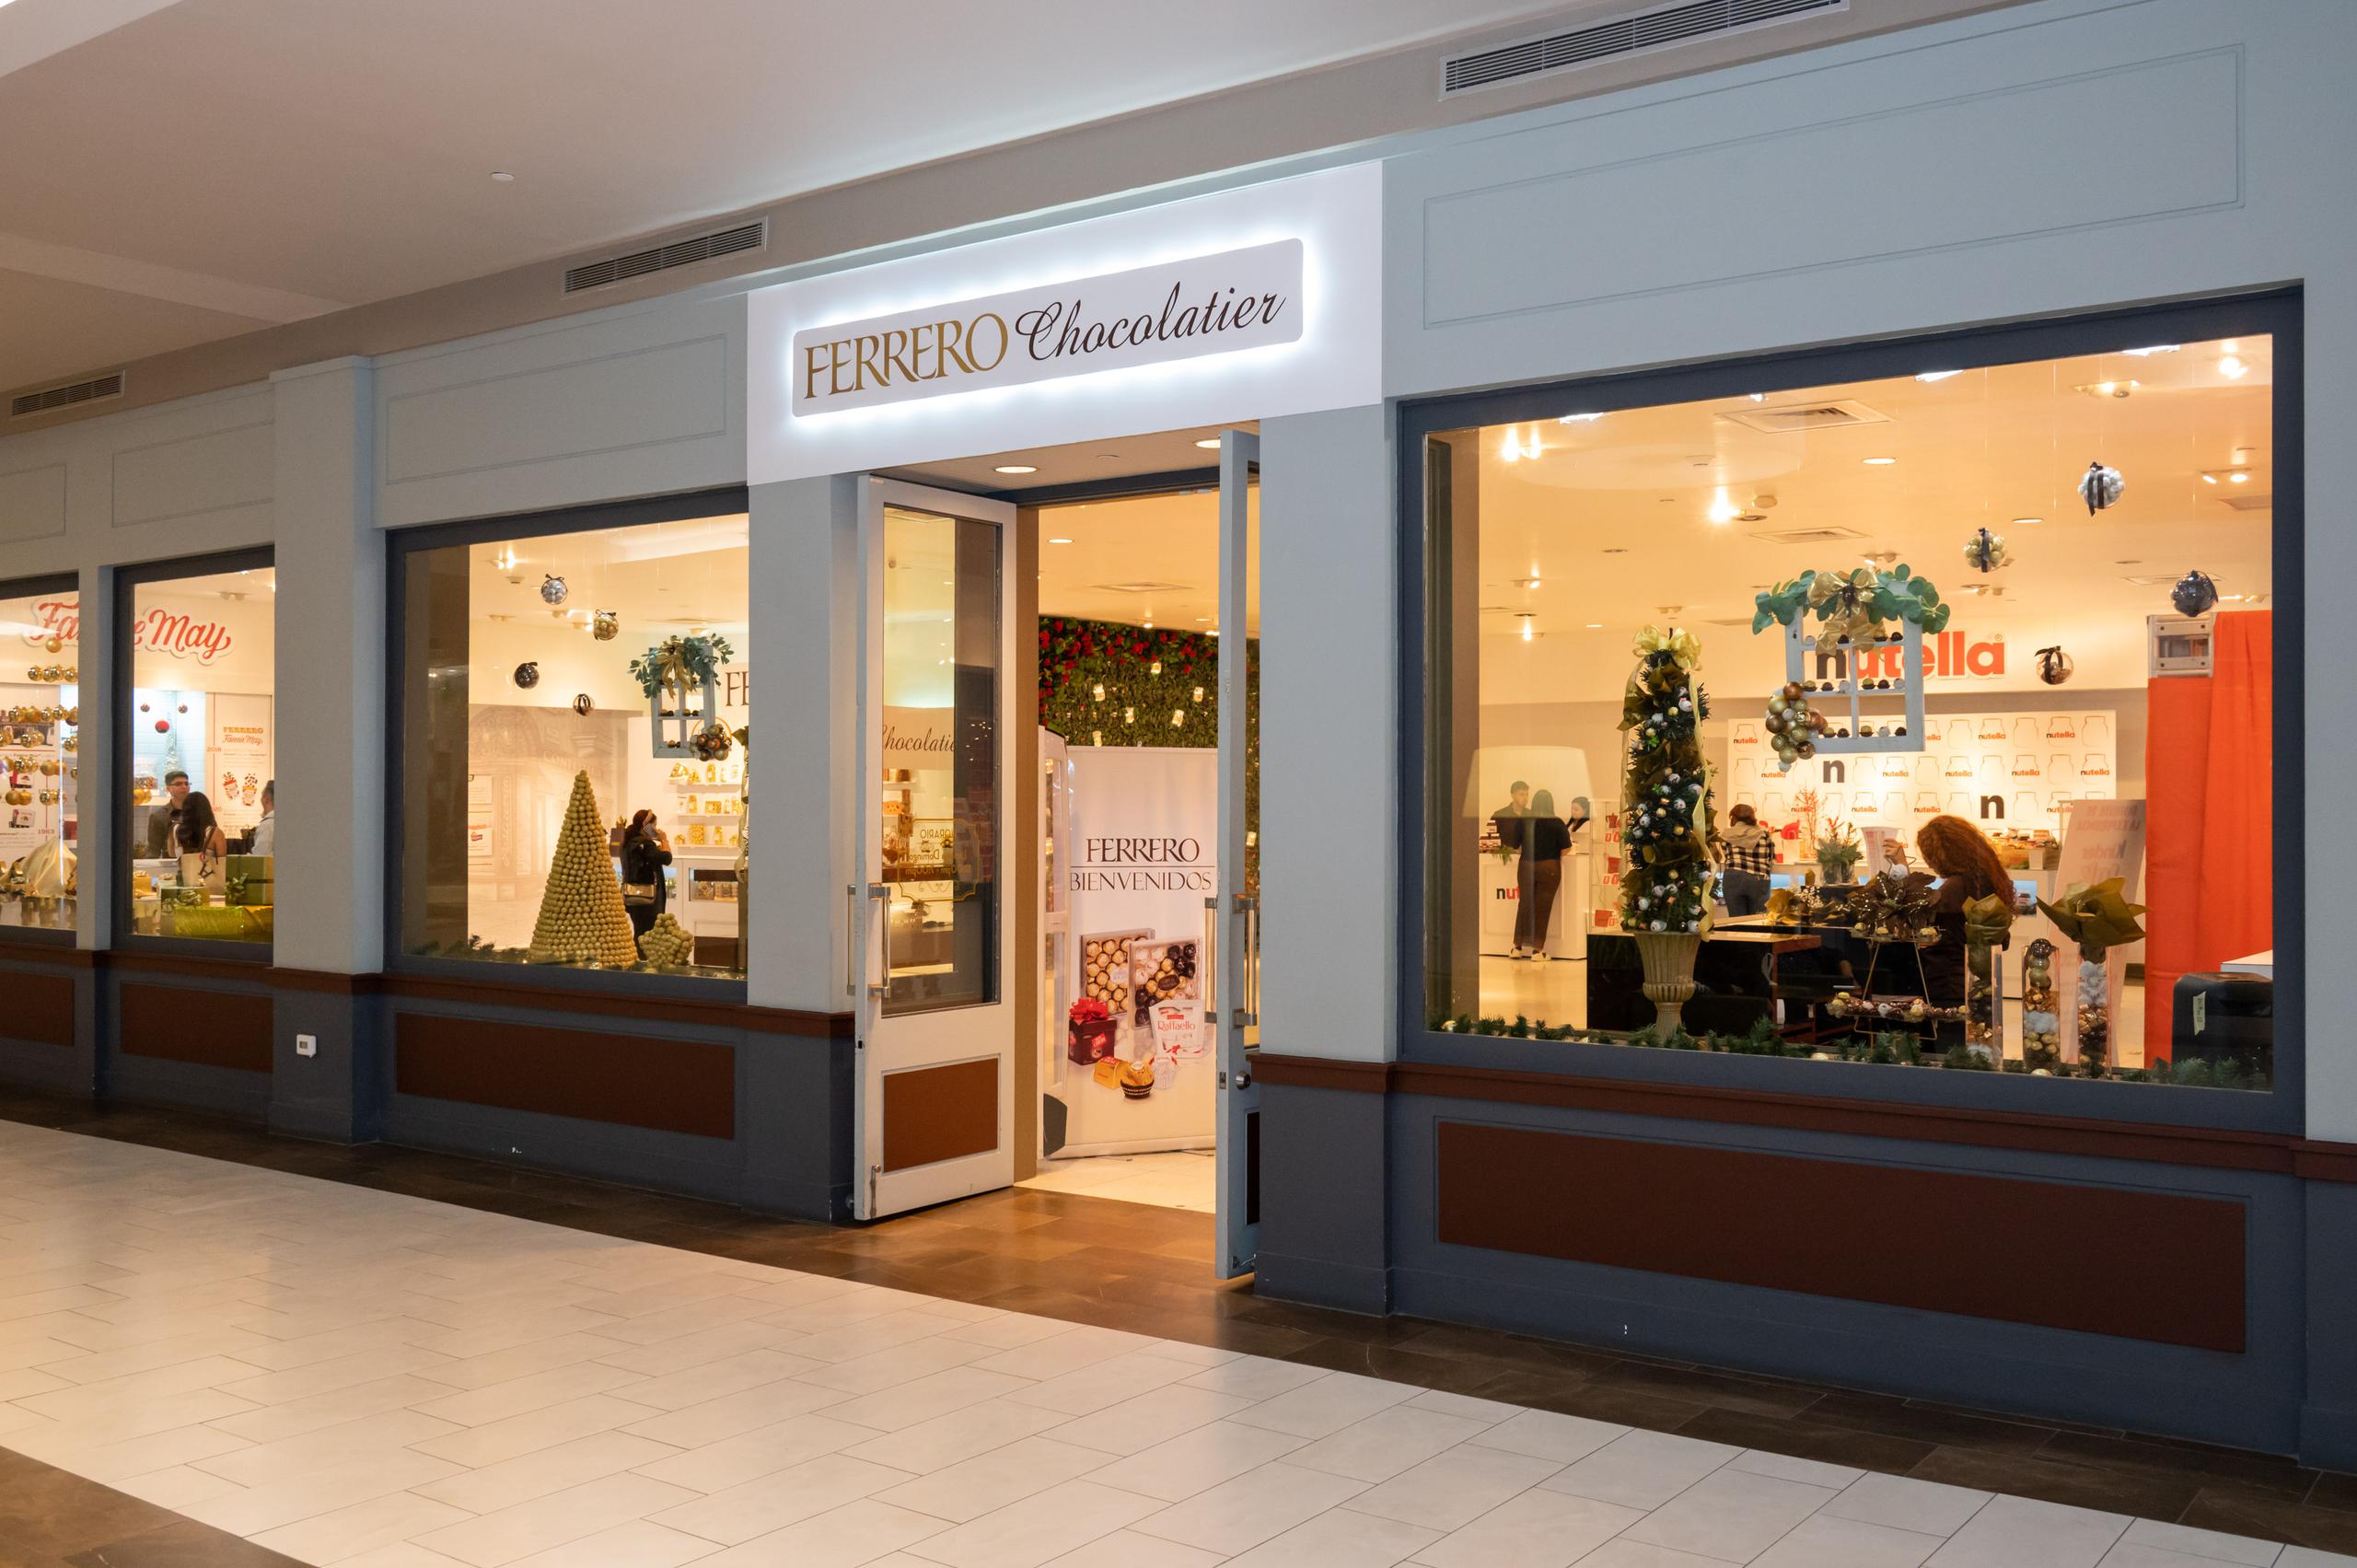 One of the new stores at Plaza Las Américas mall as of December 2022 is  Ferrero Chocolatier.